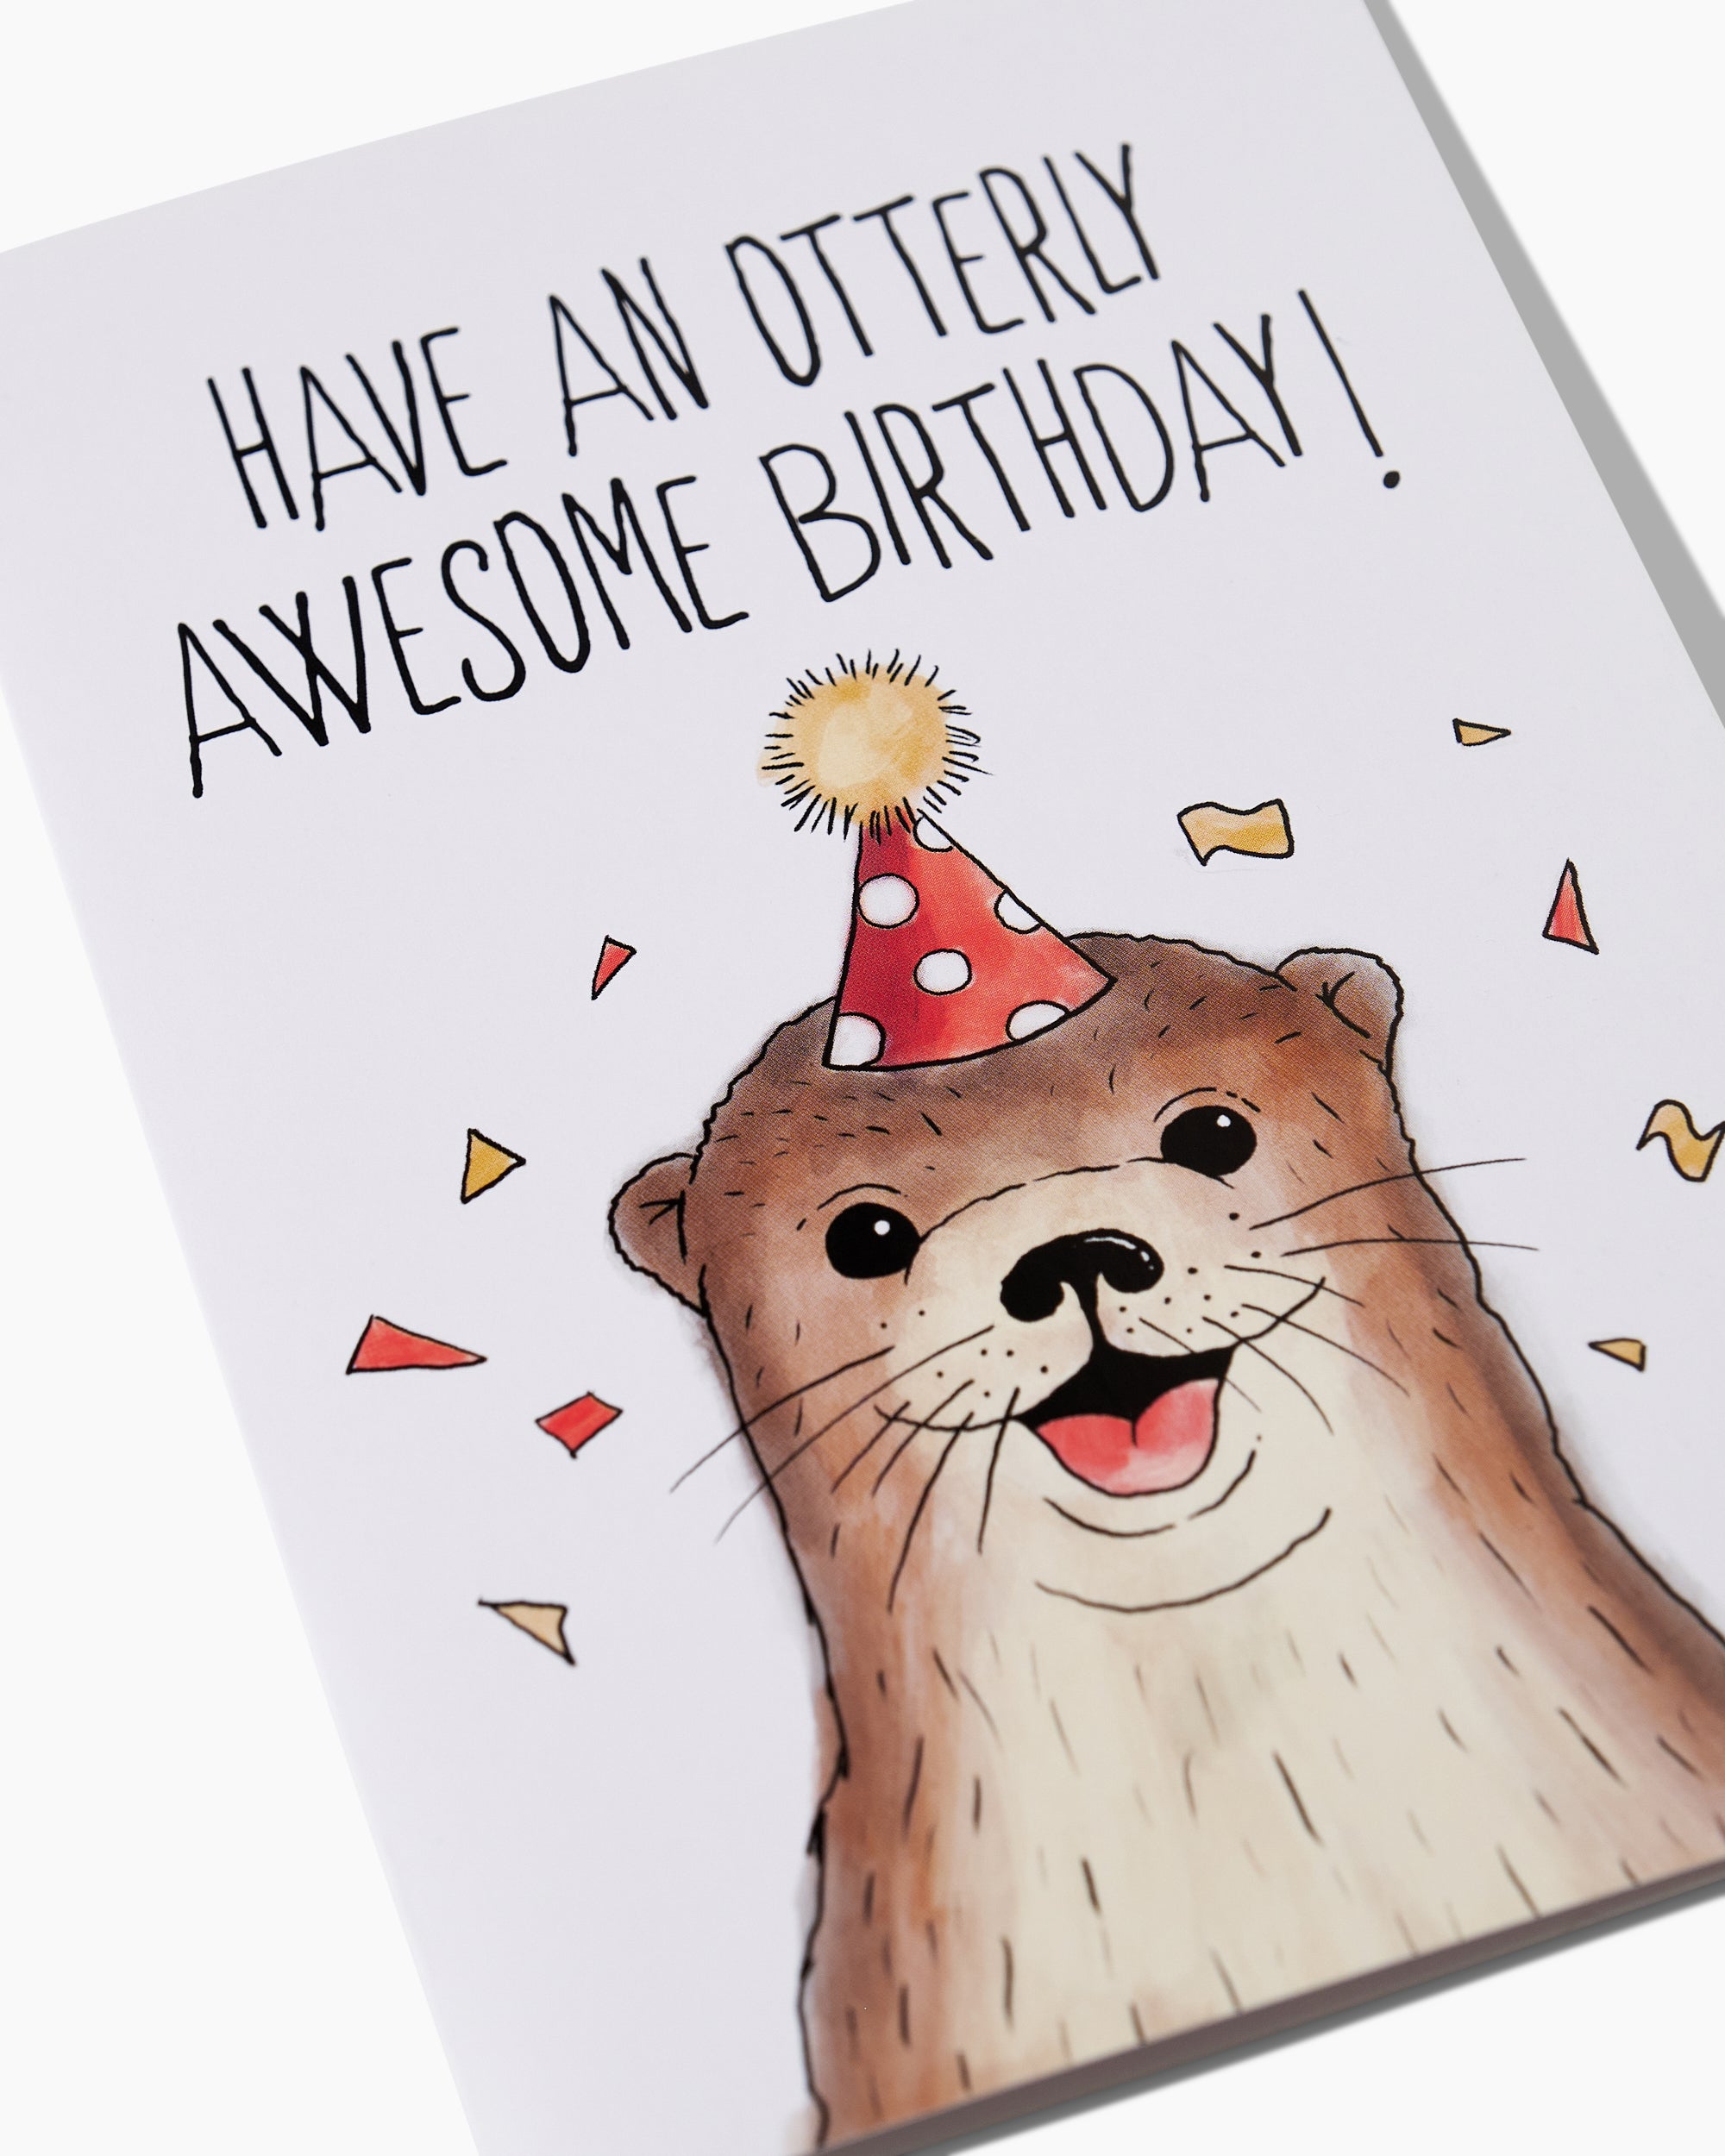 Otterly Awesome Greeting Card Australia Online